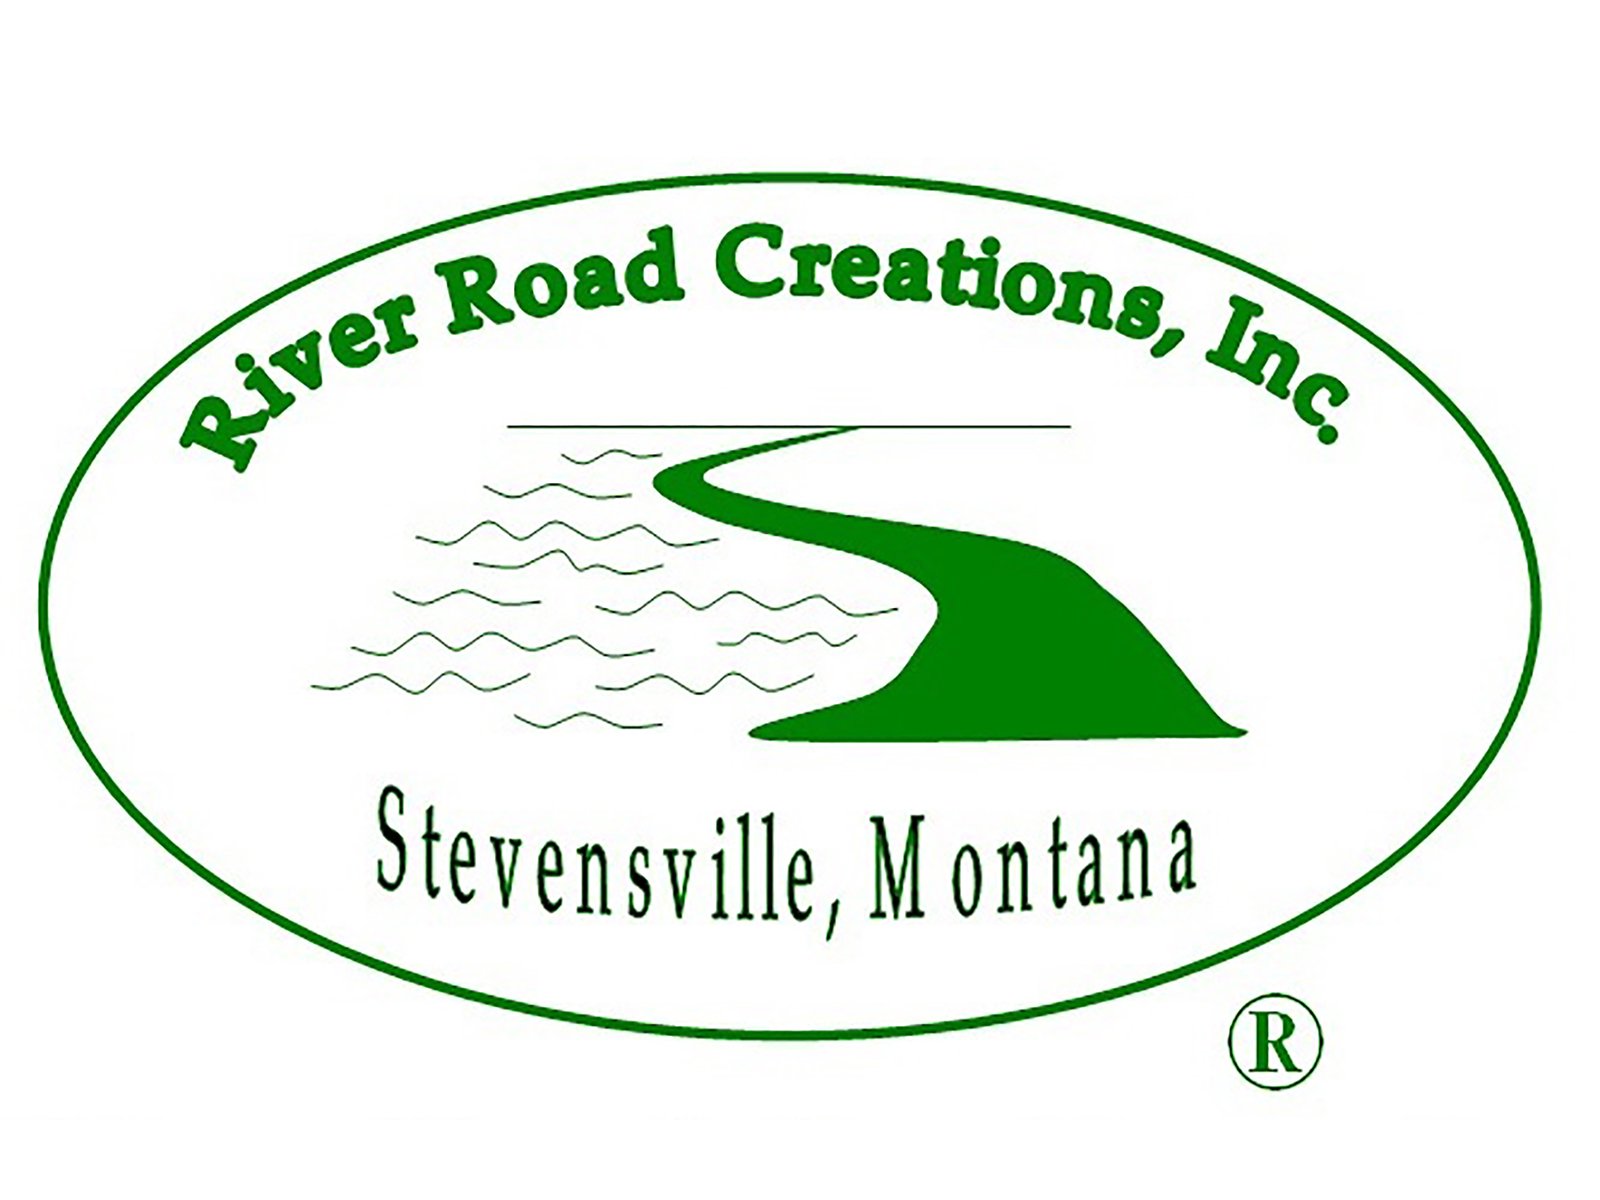 RIVER ROAD CREATIONS